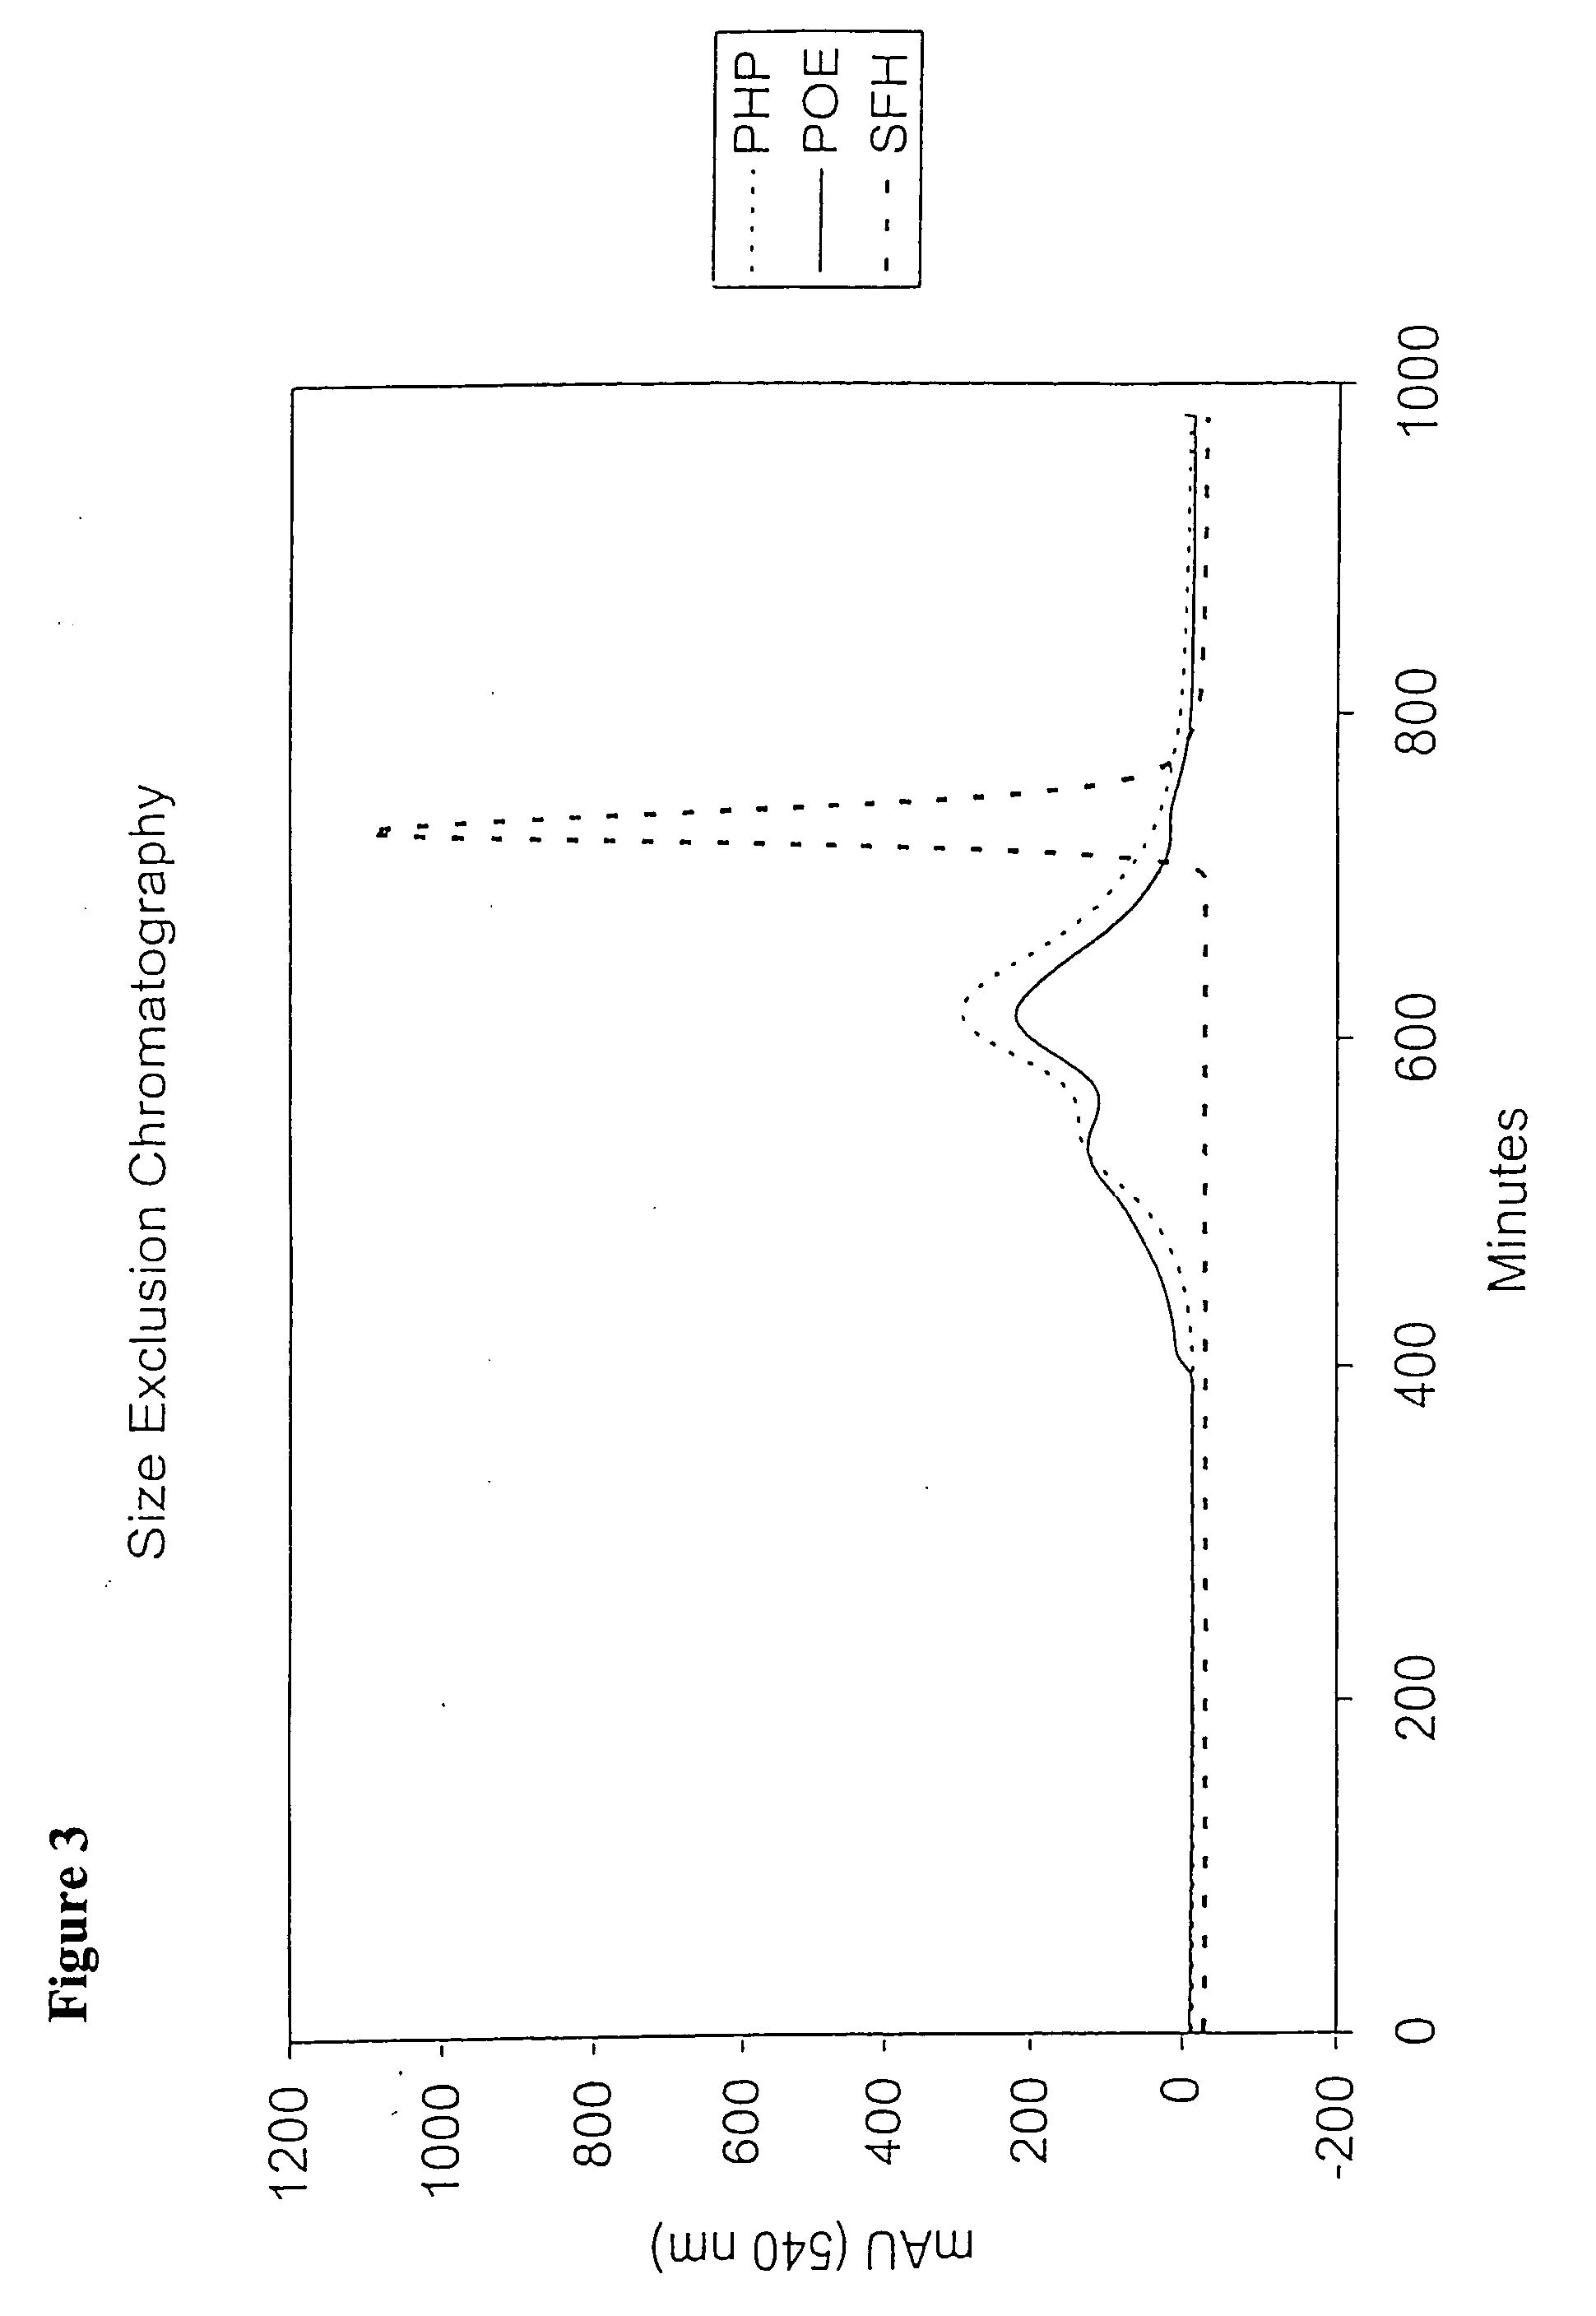 Compositions for oxygen transport comprising a high oxygen affinity modified hemoglobin